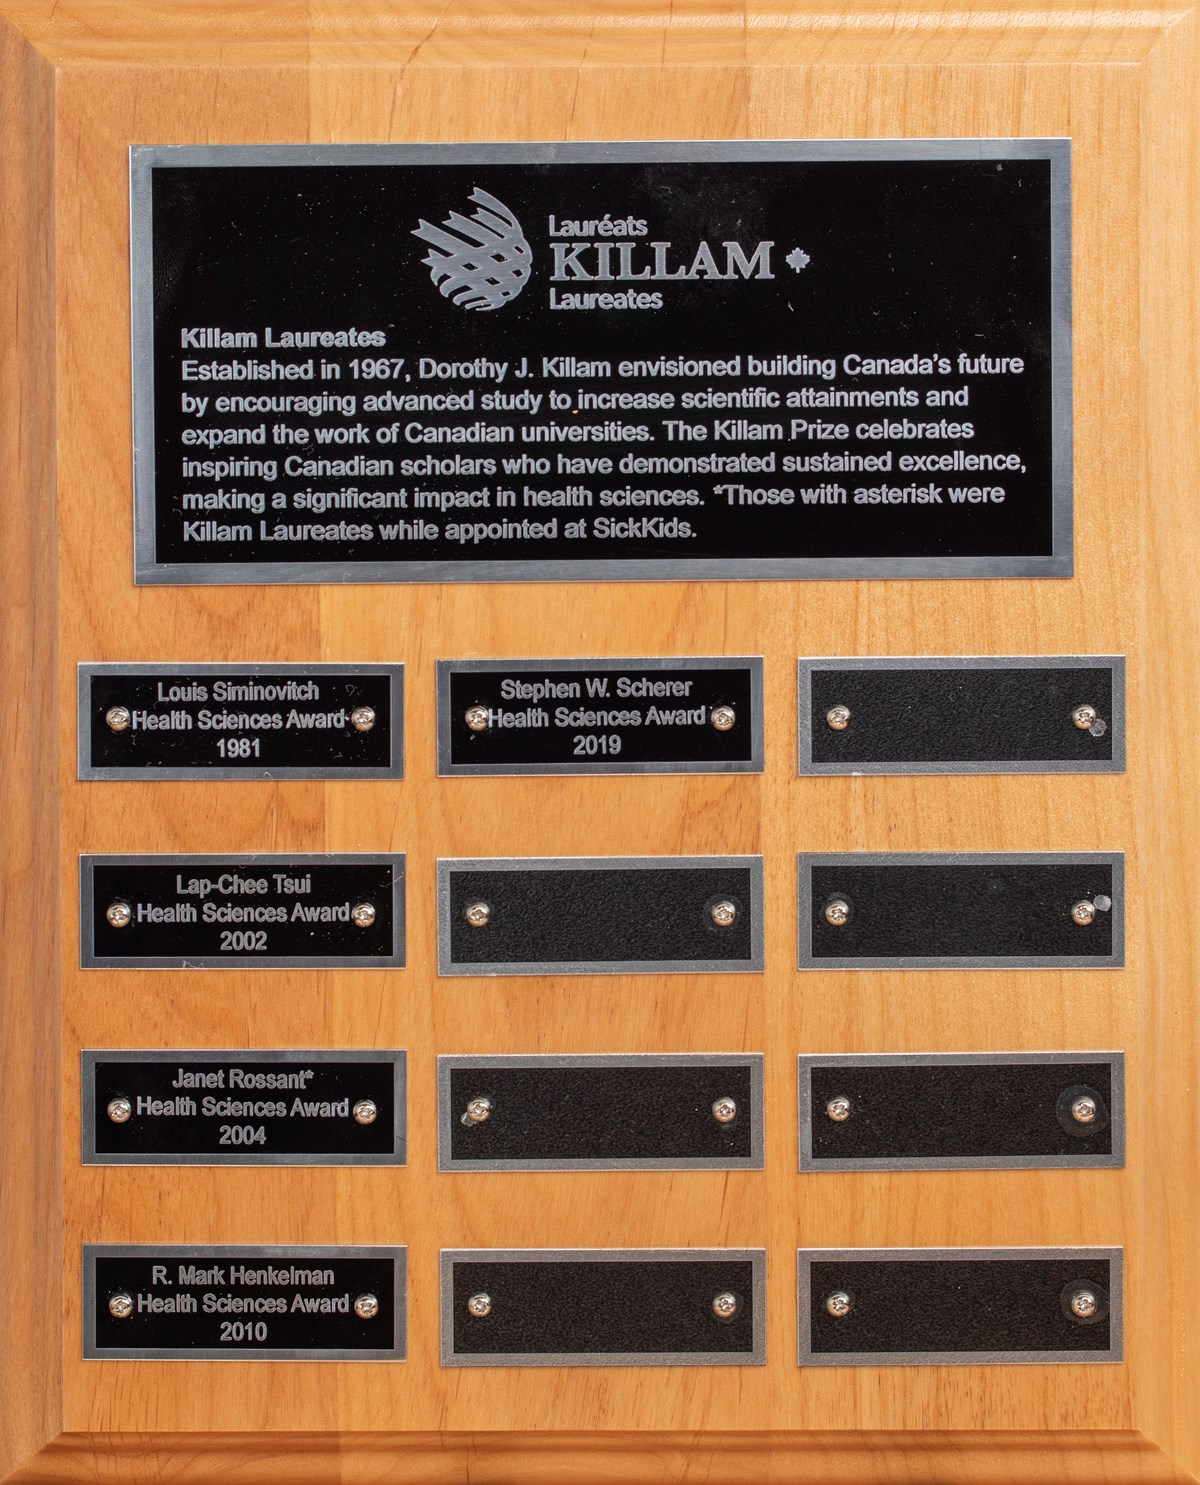 A wooden plaque of the various Killam awards that have been awarded over the years engraved on black metal plating.